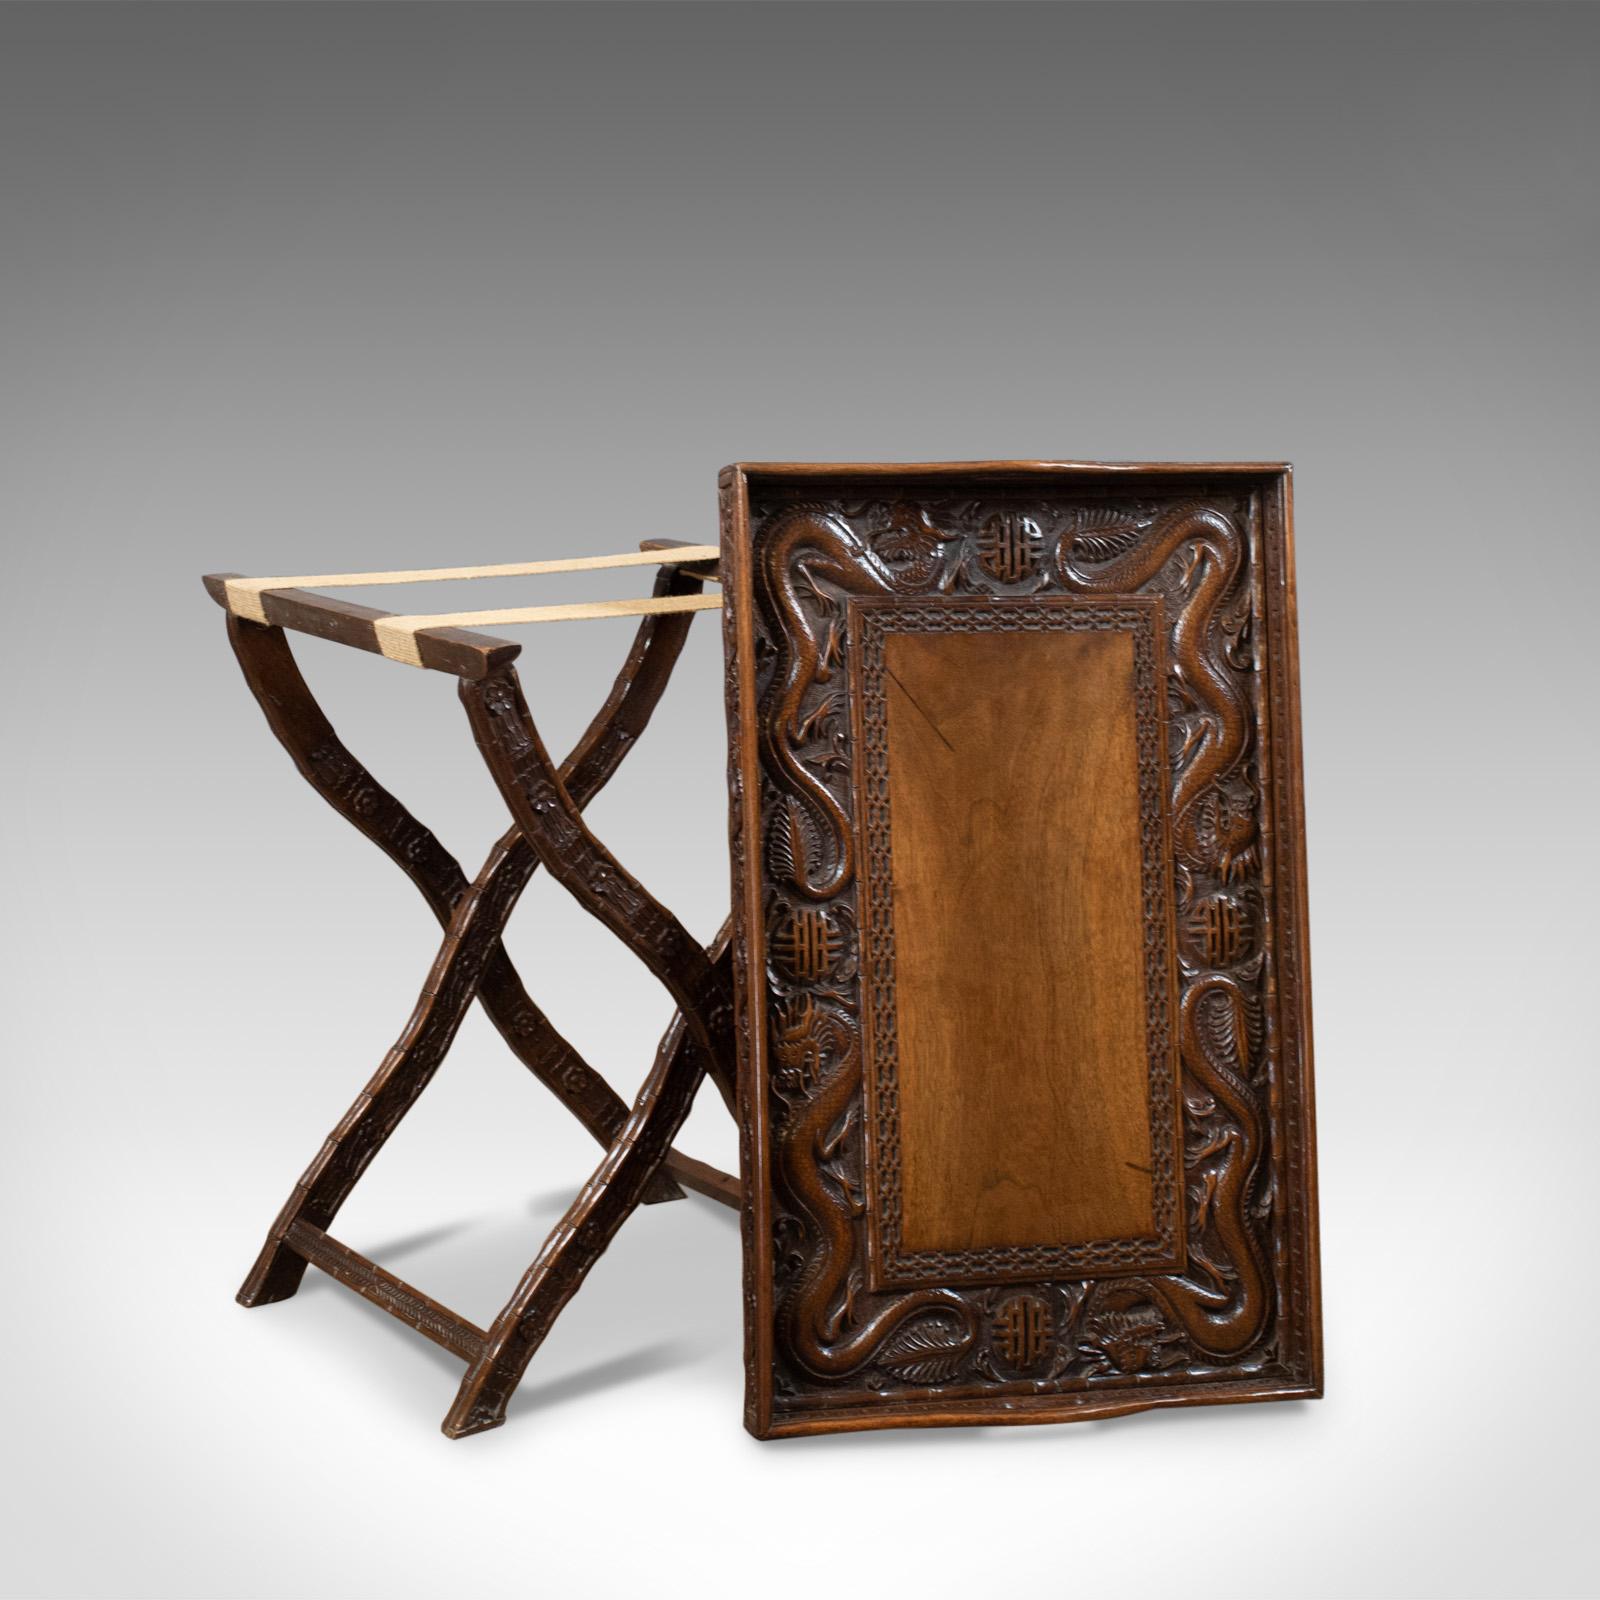 Chinese Antique Butler's Tray Table, Carved, Oriental Teak, Folding Stand, circa 1900